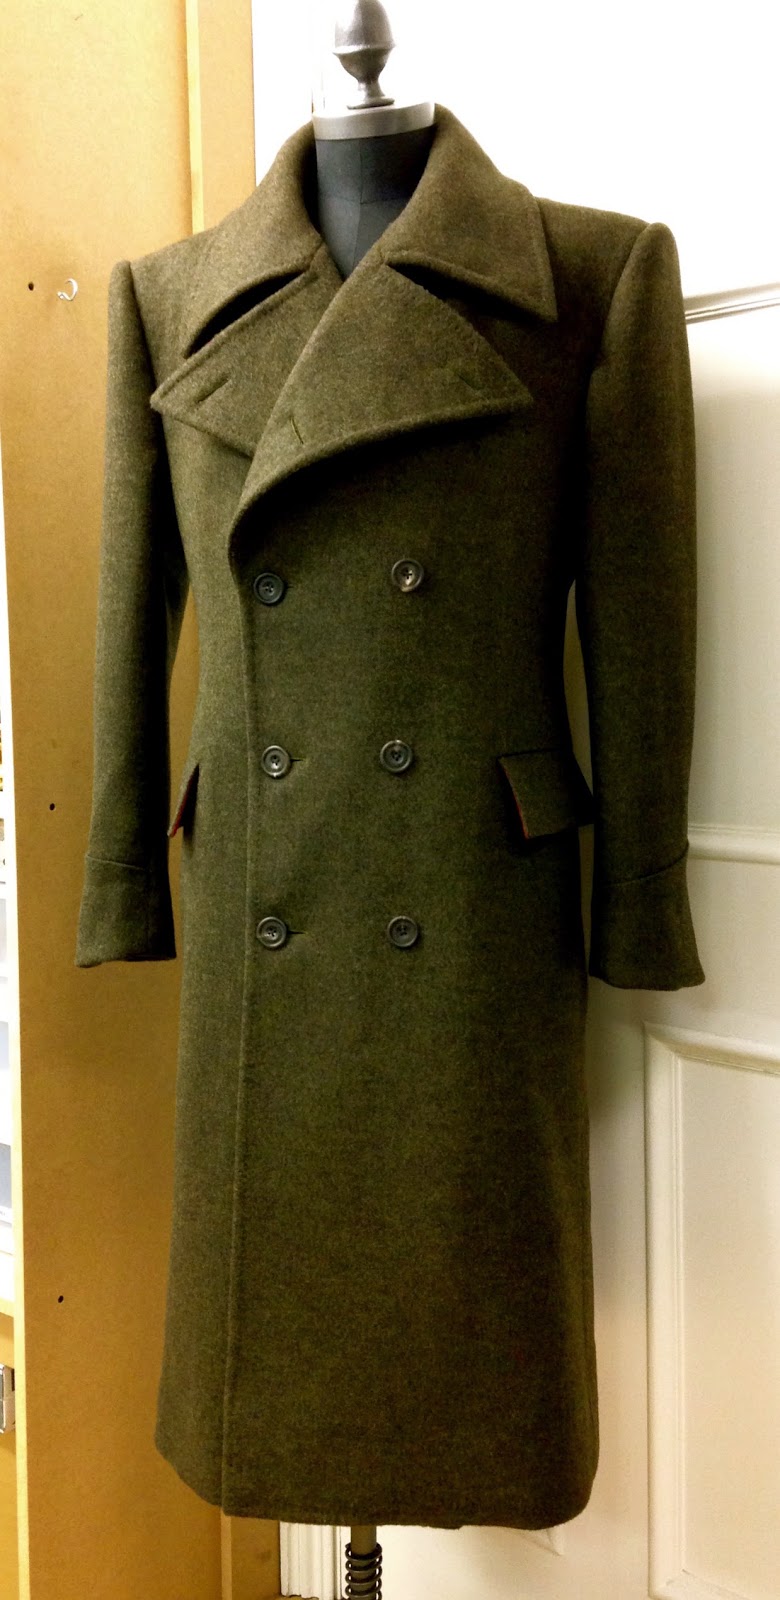 DAVIDE TAUB: Gieves & Hawkes Bespoke Great Coat in Double-Faced Wool ...